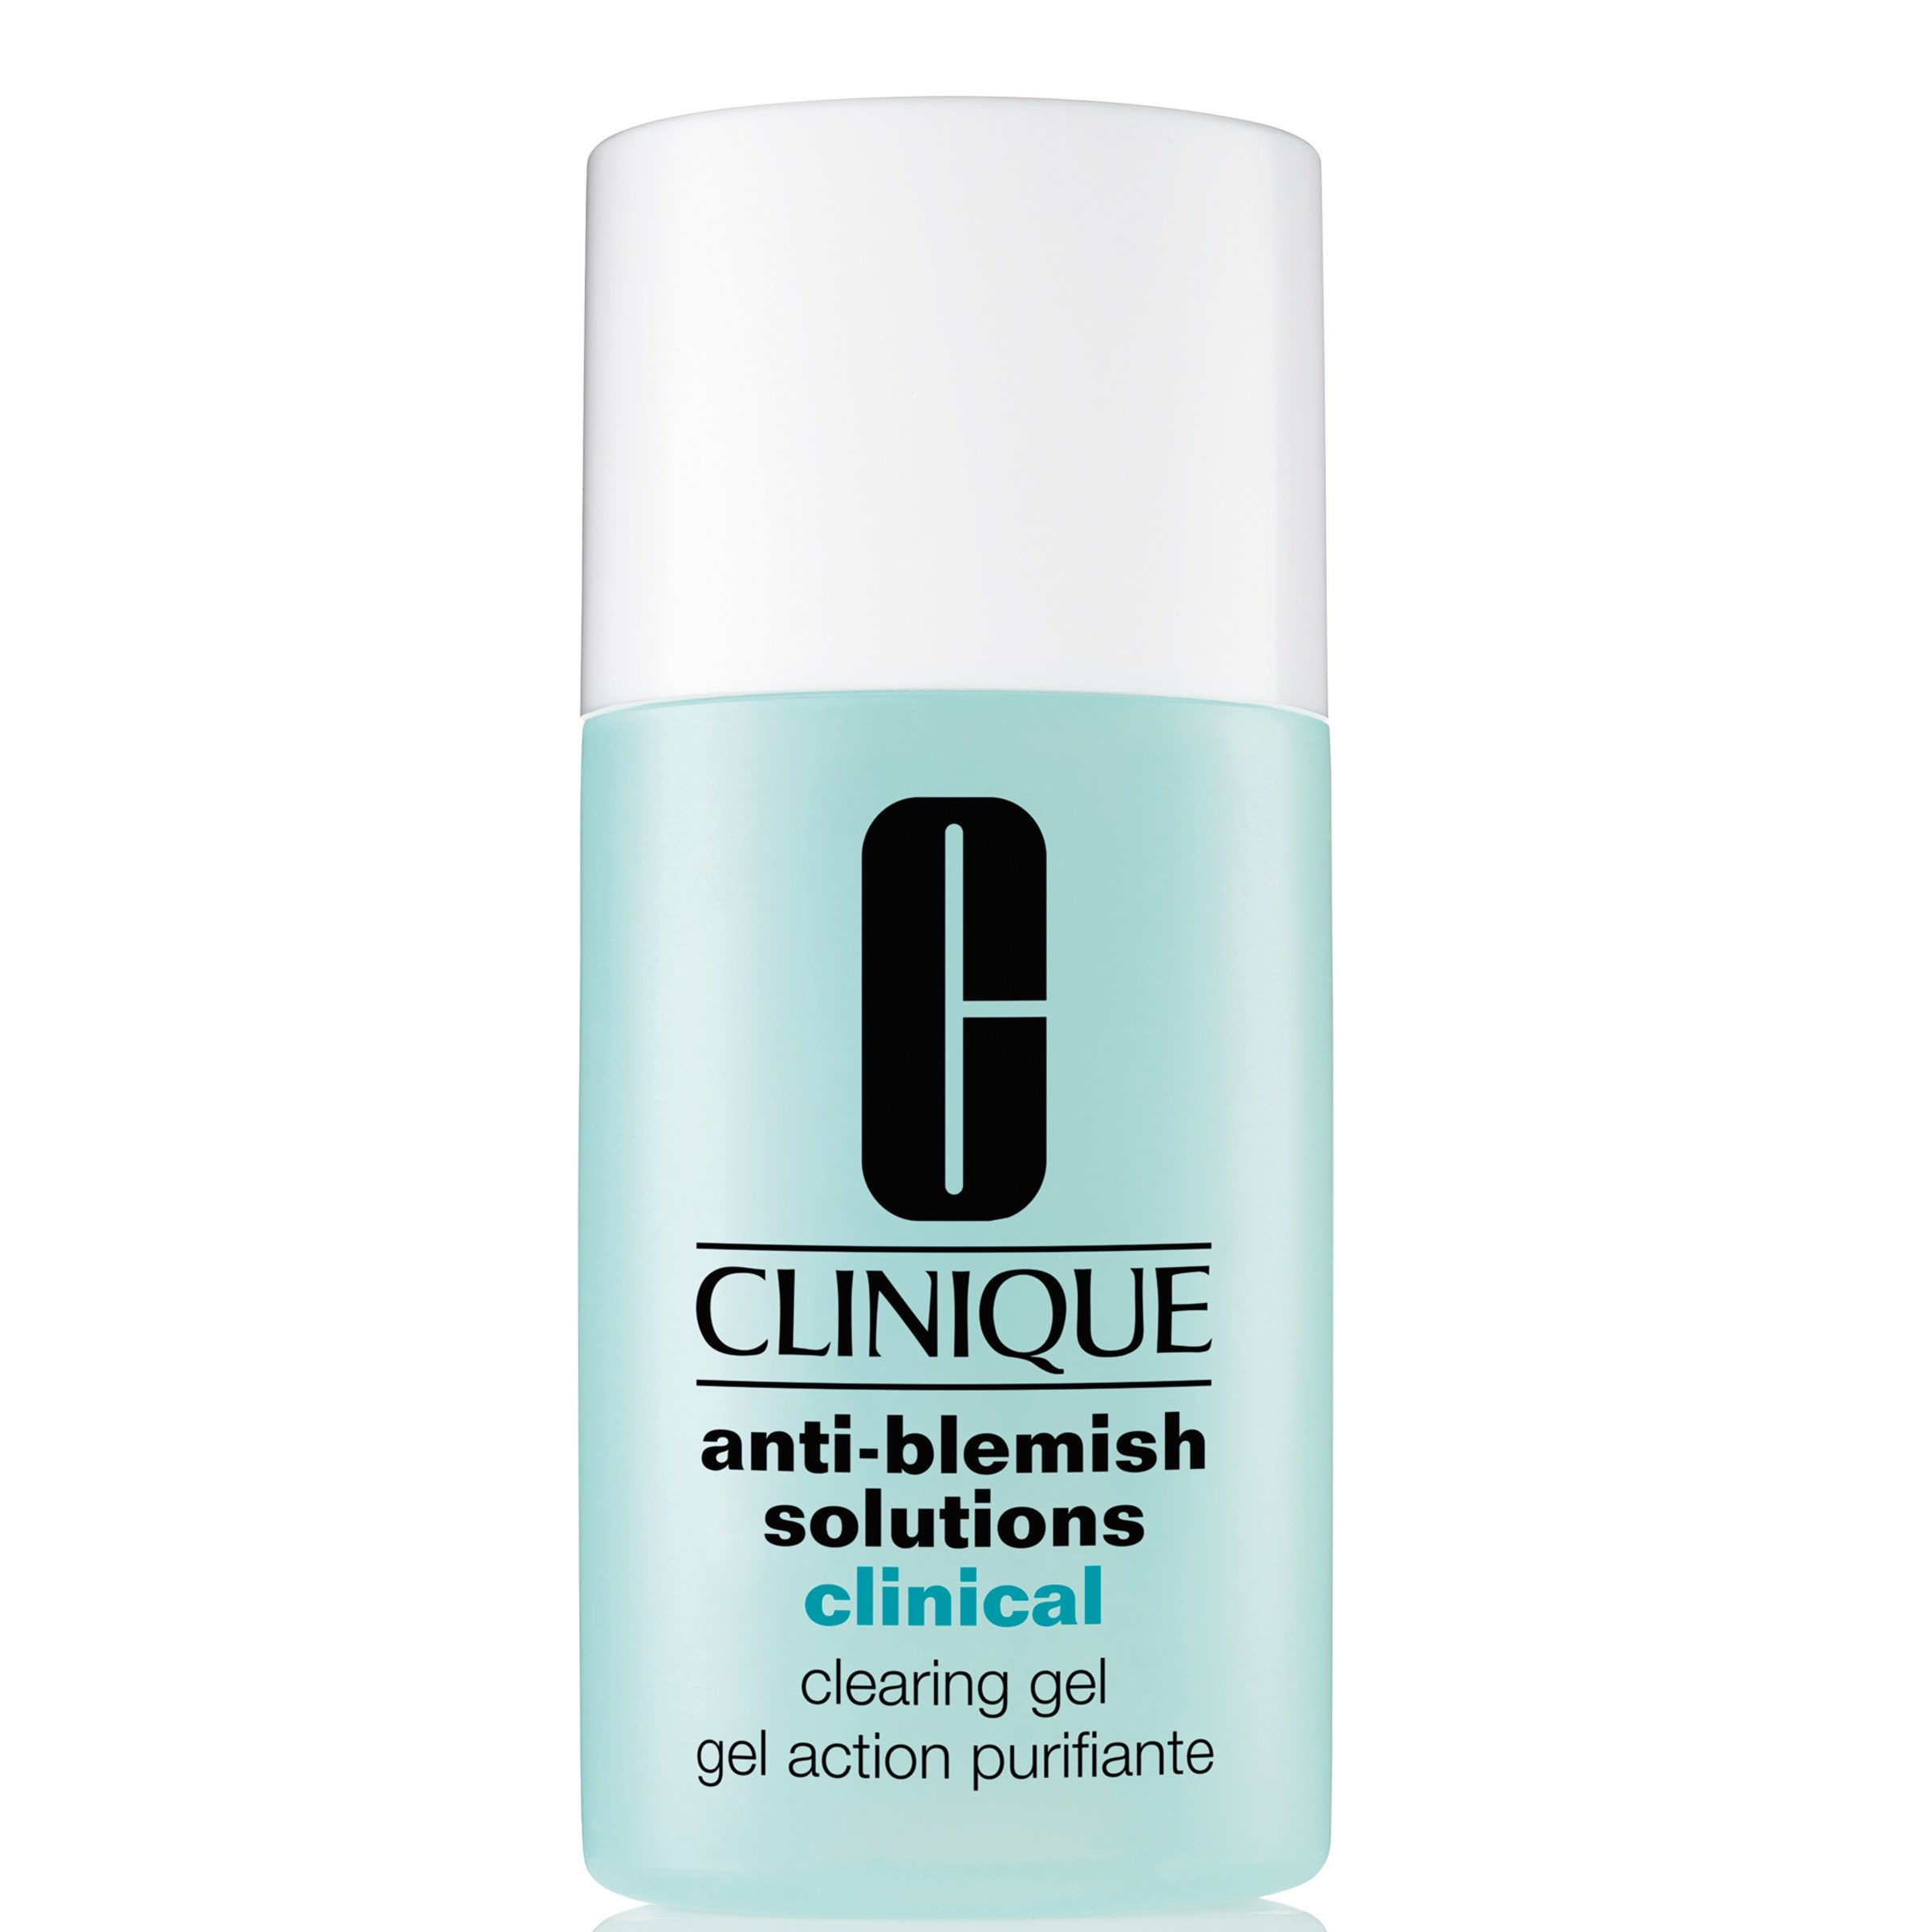 Läs mer om Clinique Anti-Blemish Solutions Clinical Clearing Gel 15 ml